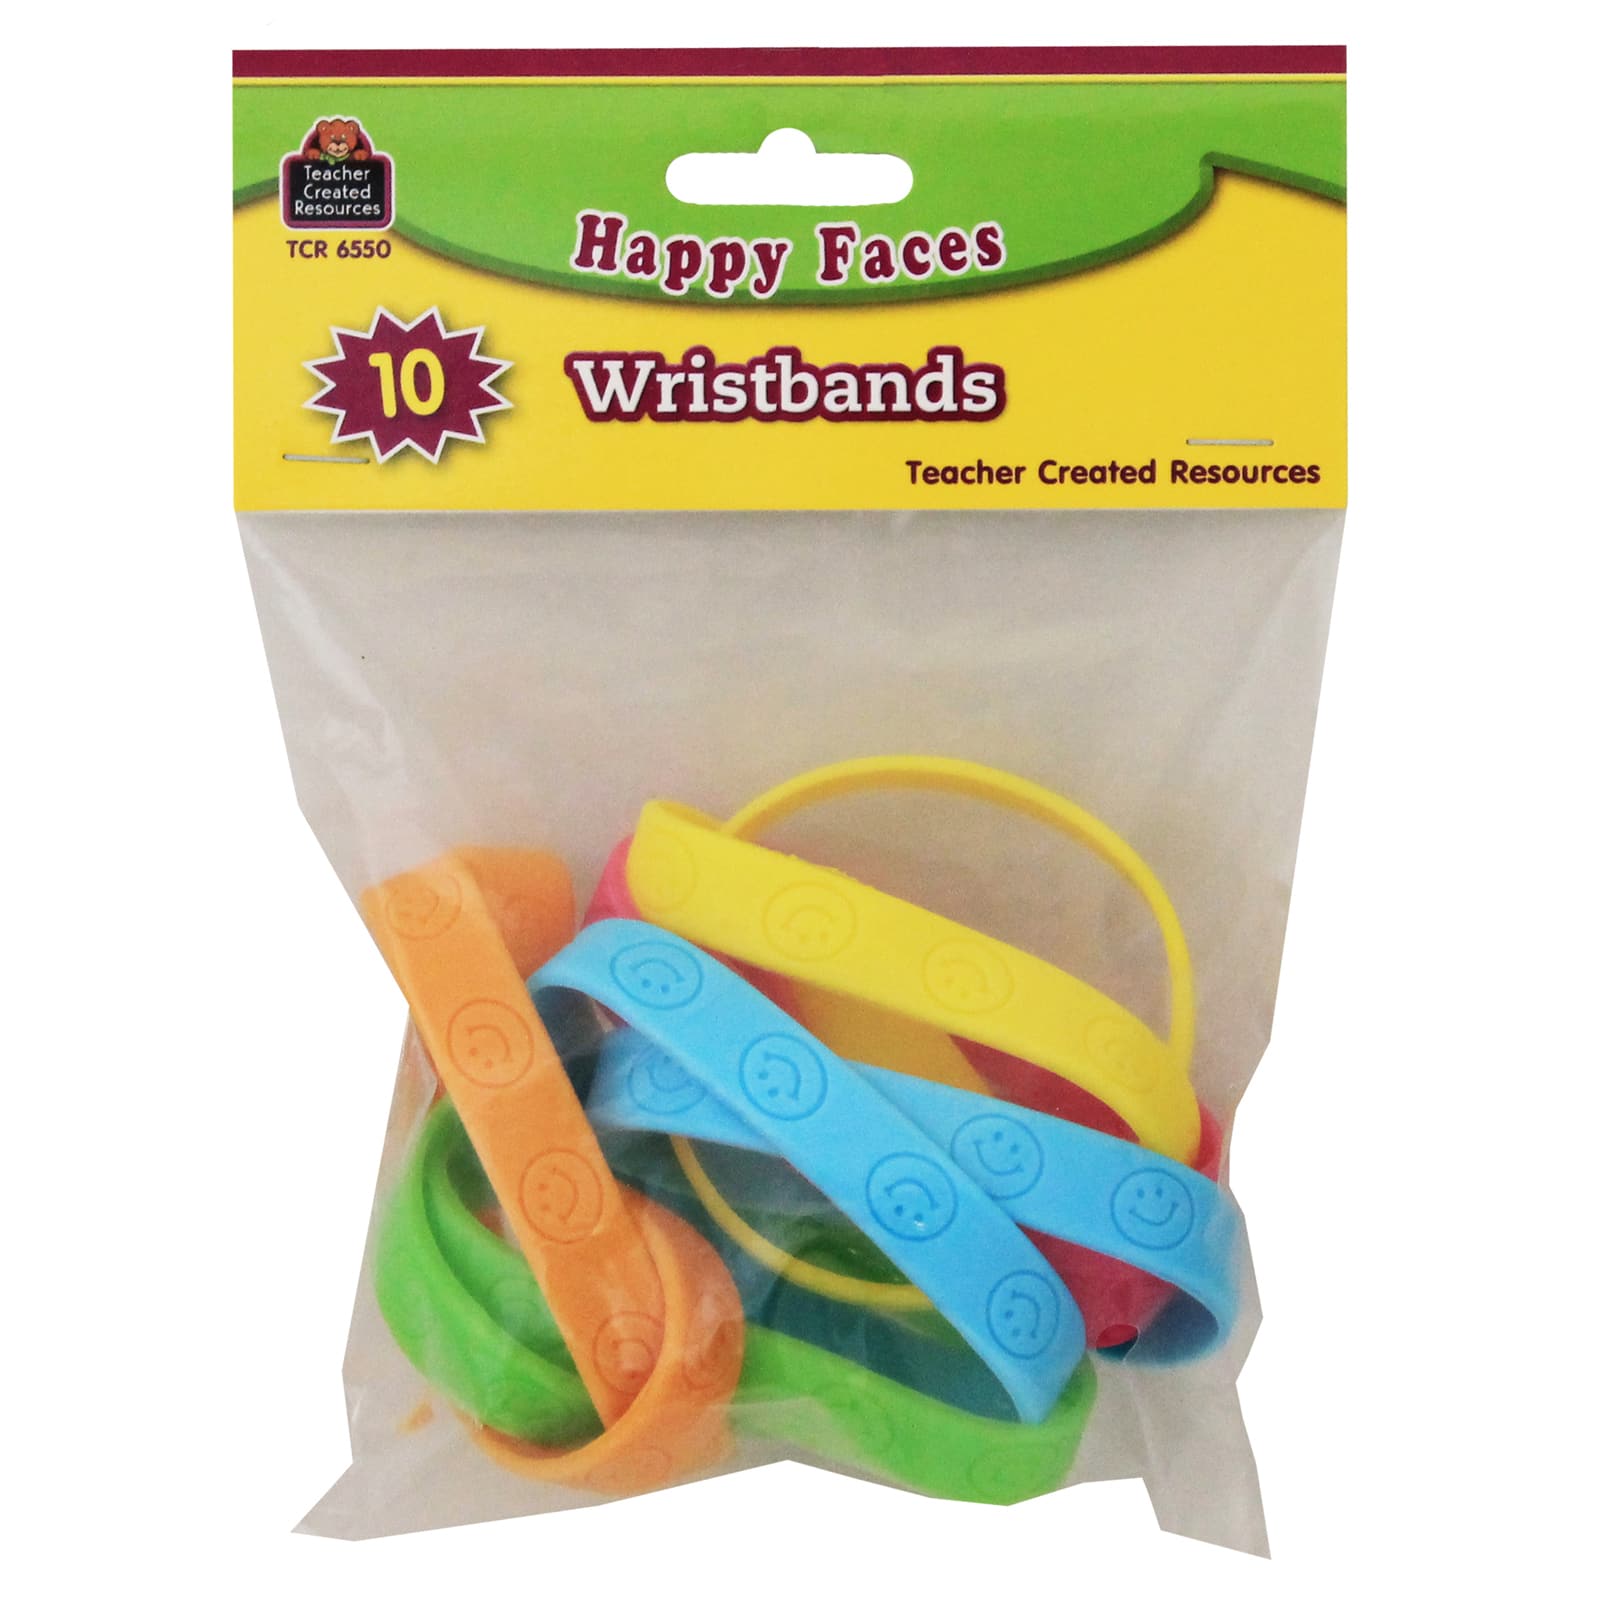 Teacher Created Resources Happy Faces Wristbands, 6 Packs of 10